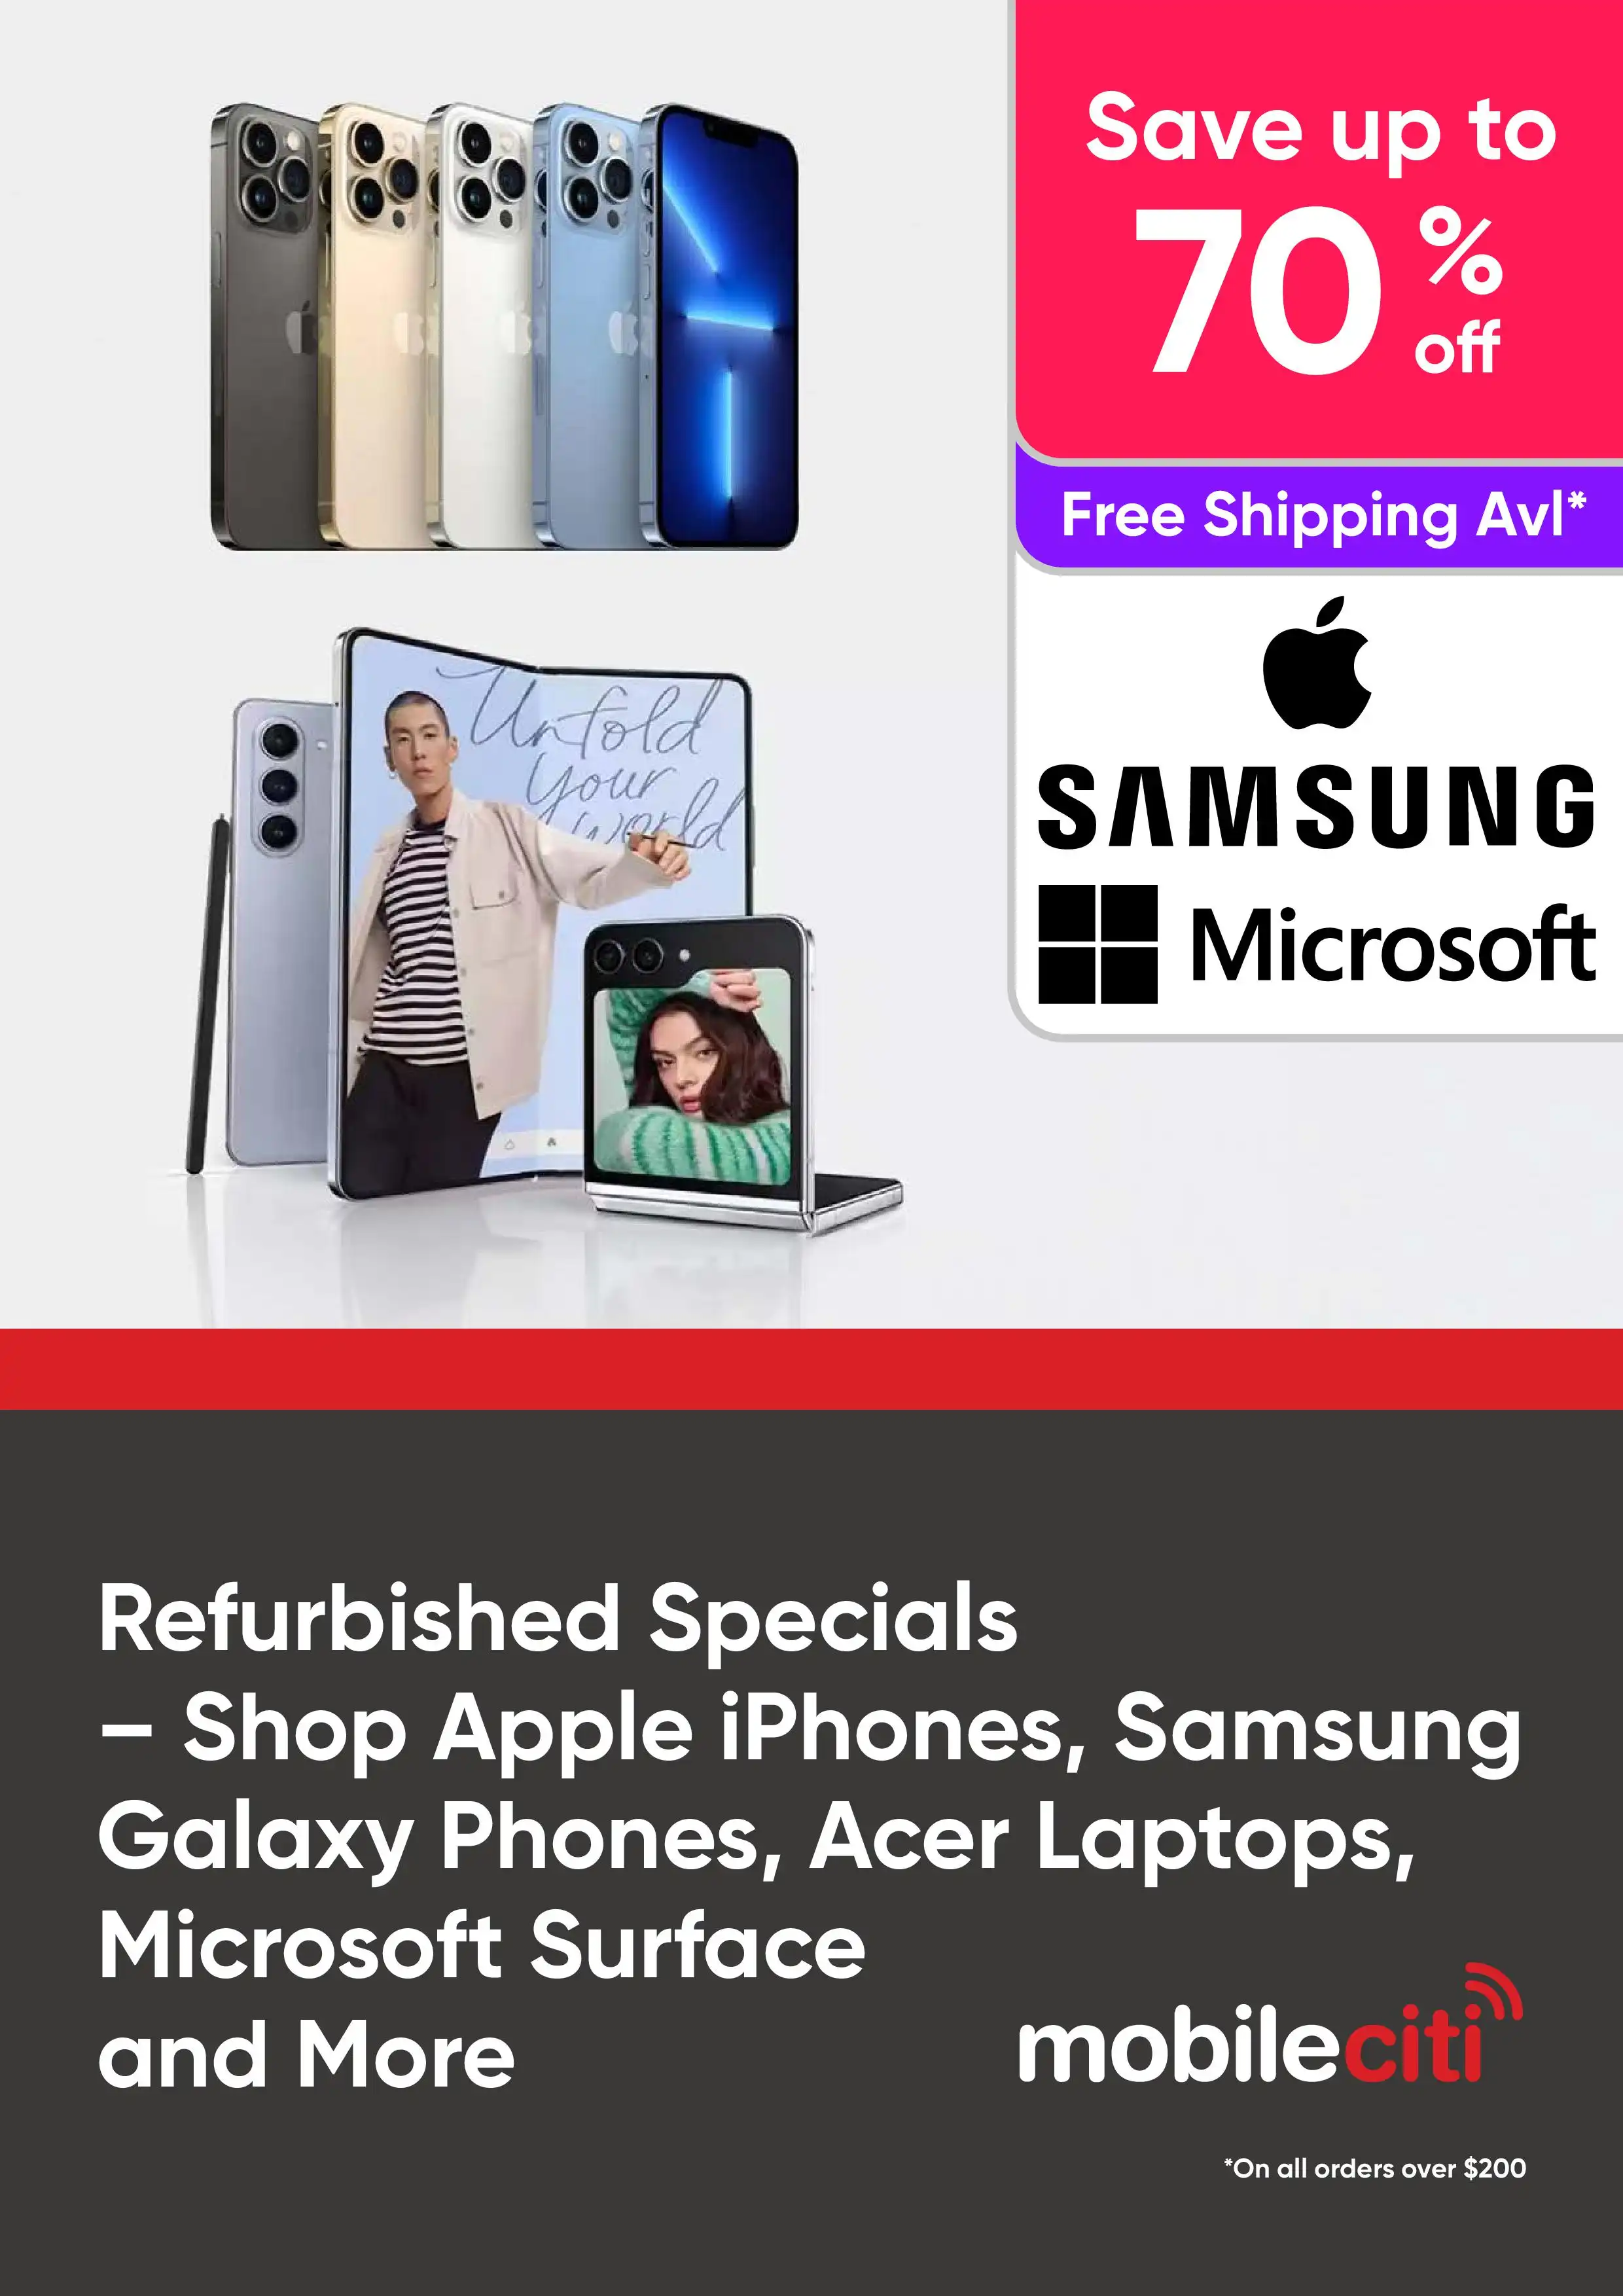 Refurbished Specials- Save Up to 70% Off On Apple iPhones, Samsung Galaxy Phones, Acer Laptops, Microsoft Surface and More